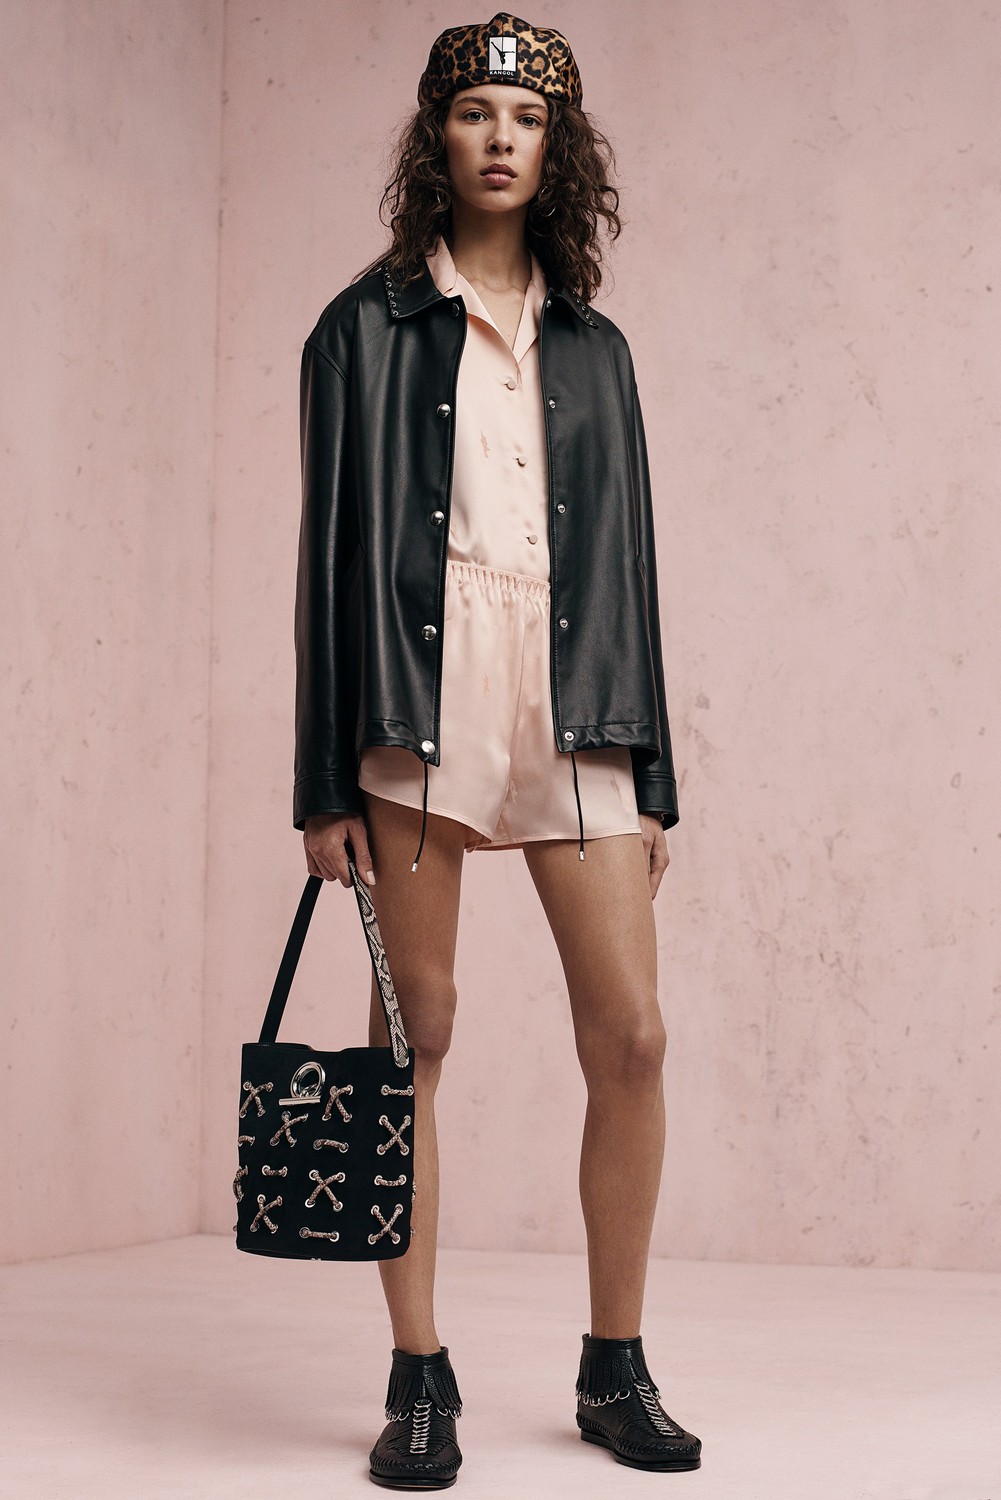 Alexander Wang embraces buy now with simultaneous launch of